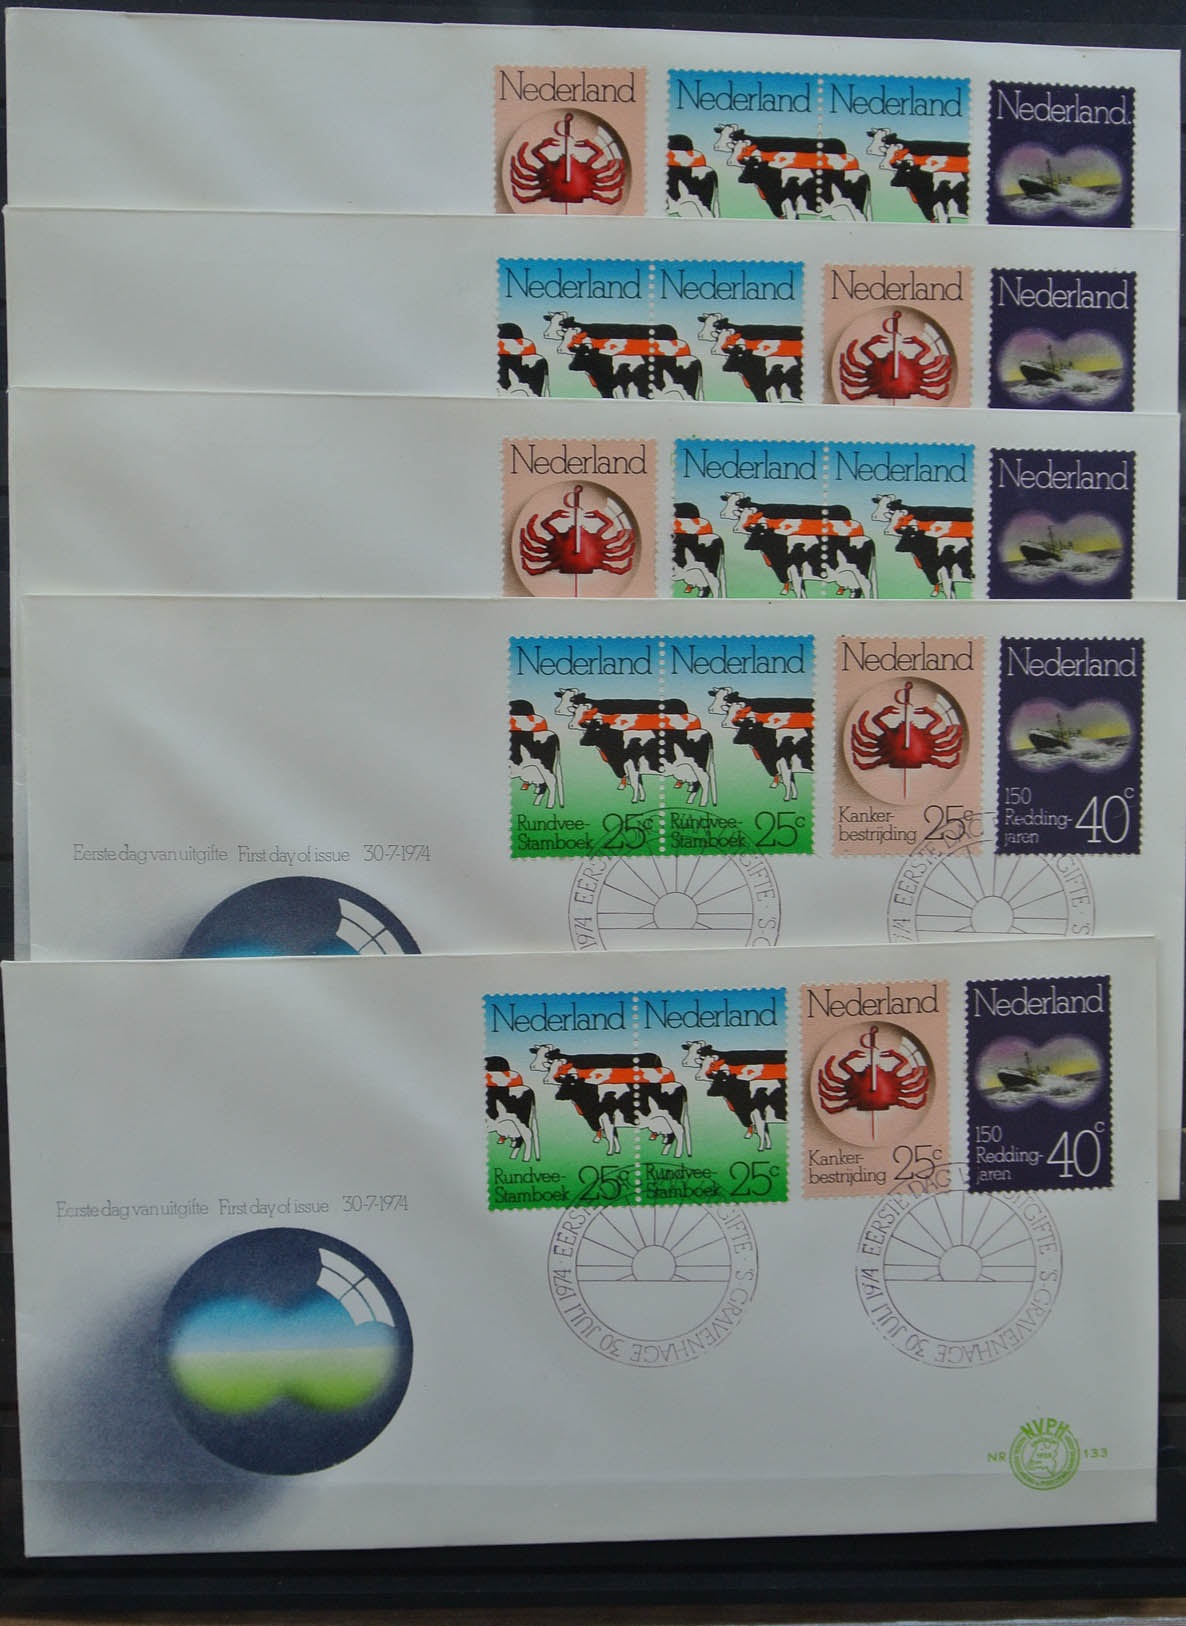 13015 002 - 13015 Netherlands 1974 double cow on fdc!